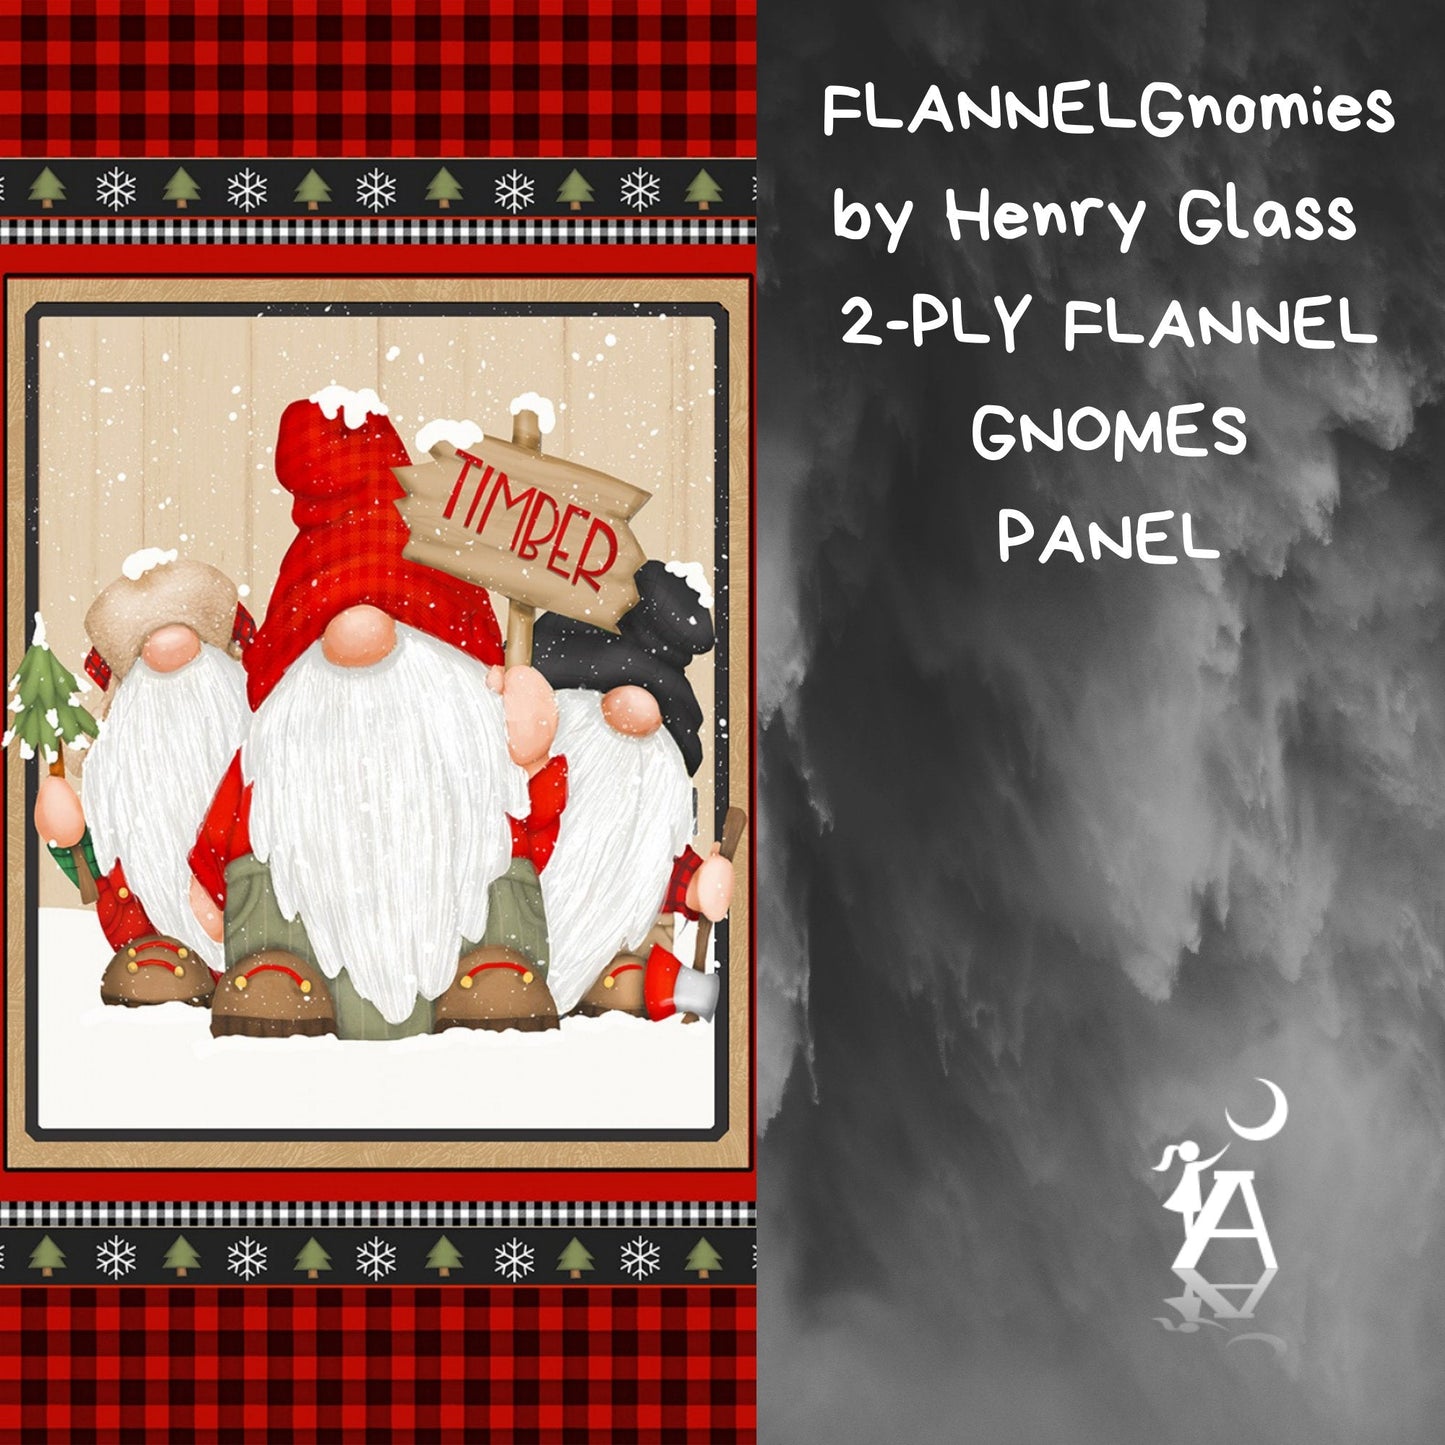 Henry Glass Fabric Snowman FLANNEL from Henry Glass Flannel Gnomies